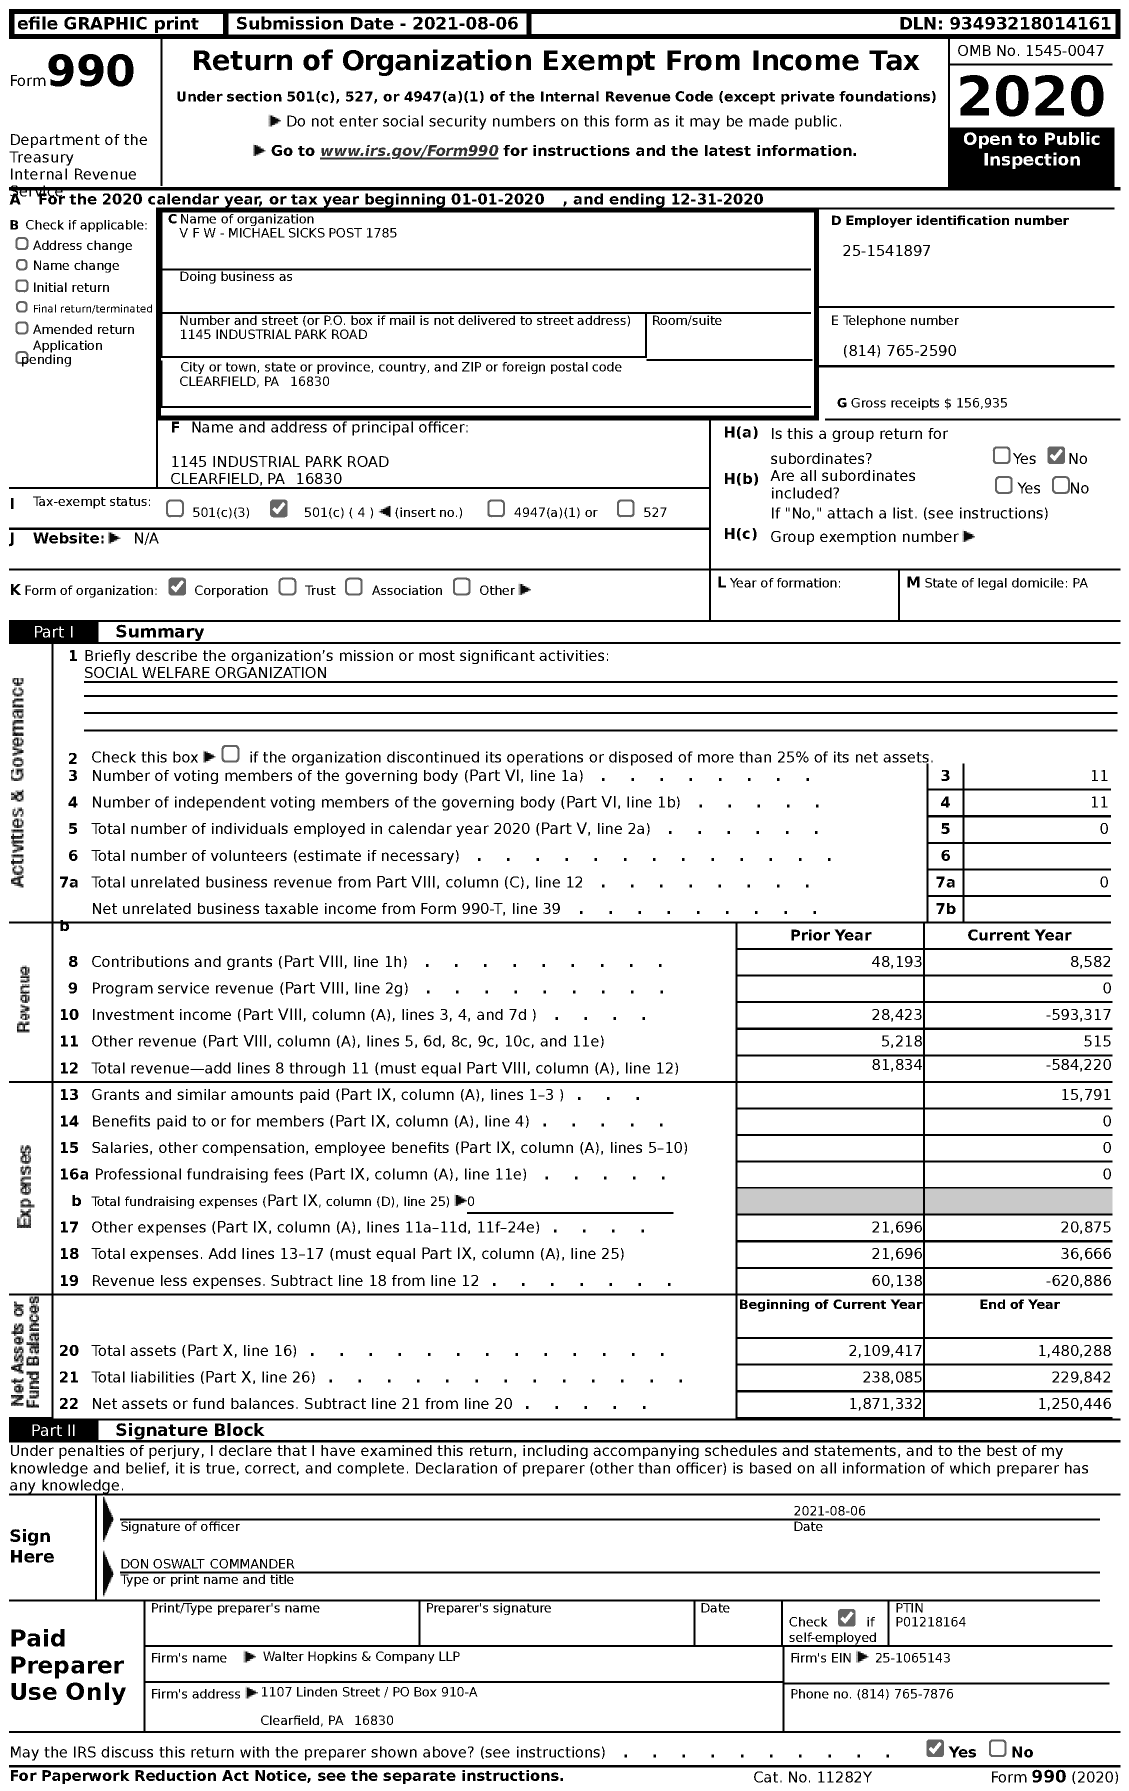 Image of first page of 2020 Form 990 for VFW Department of Pennsylvania - 1785 F Michael Sicks Post